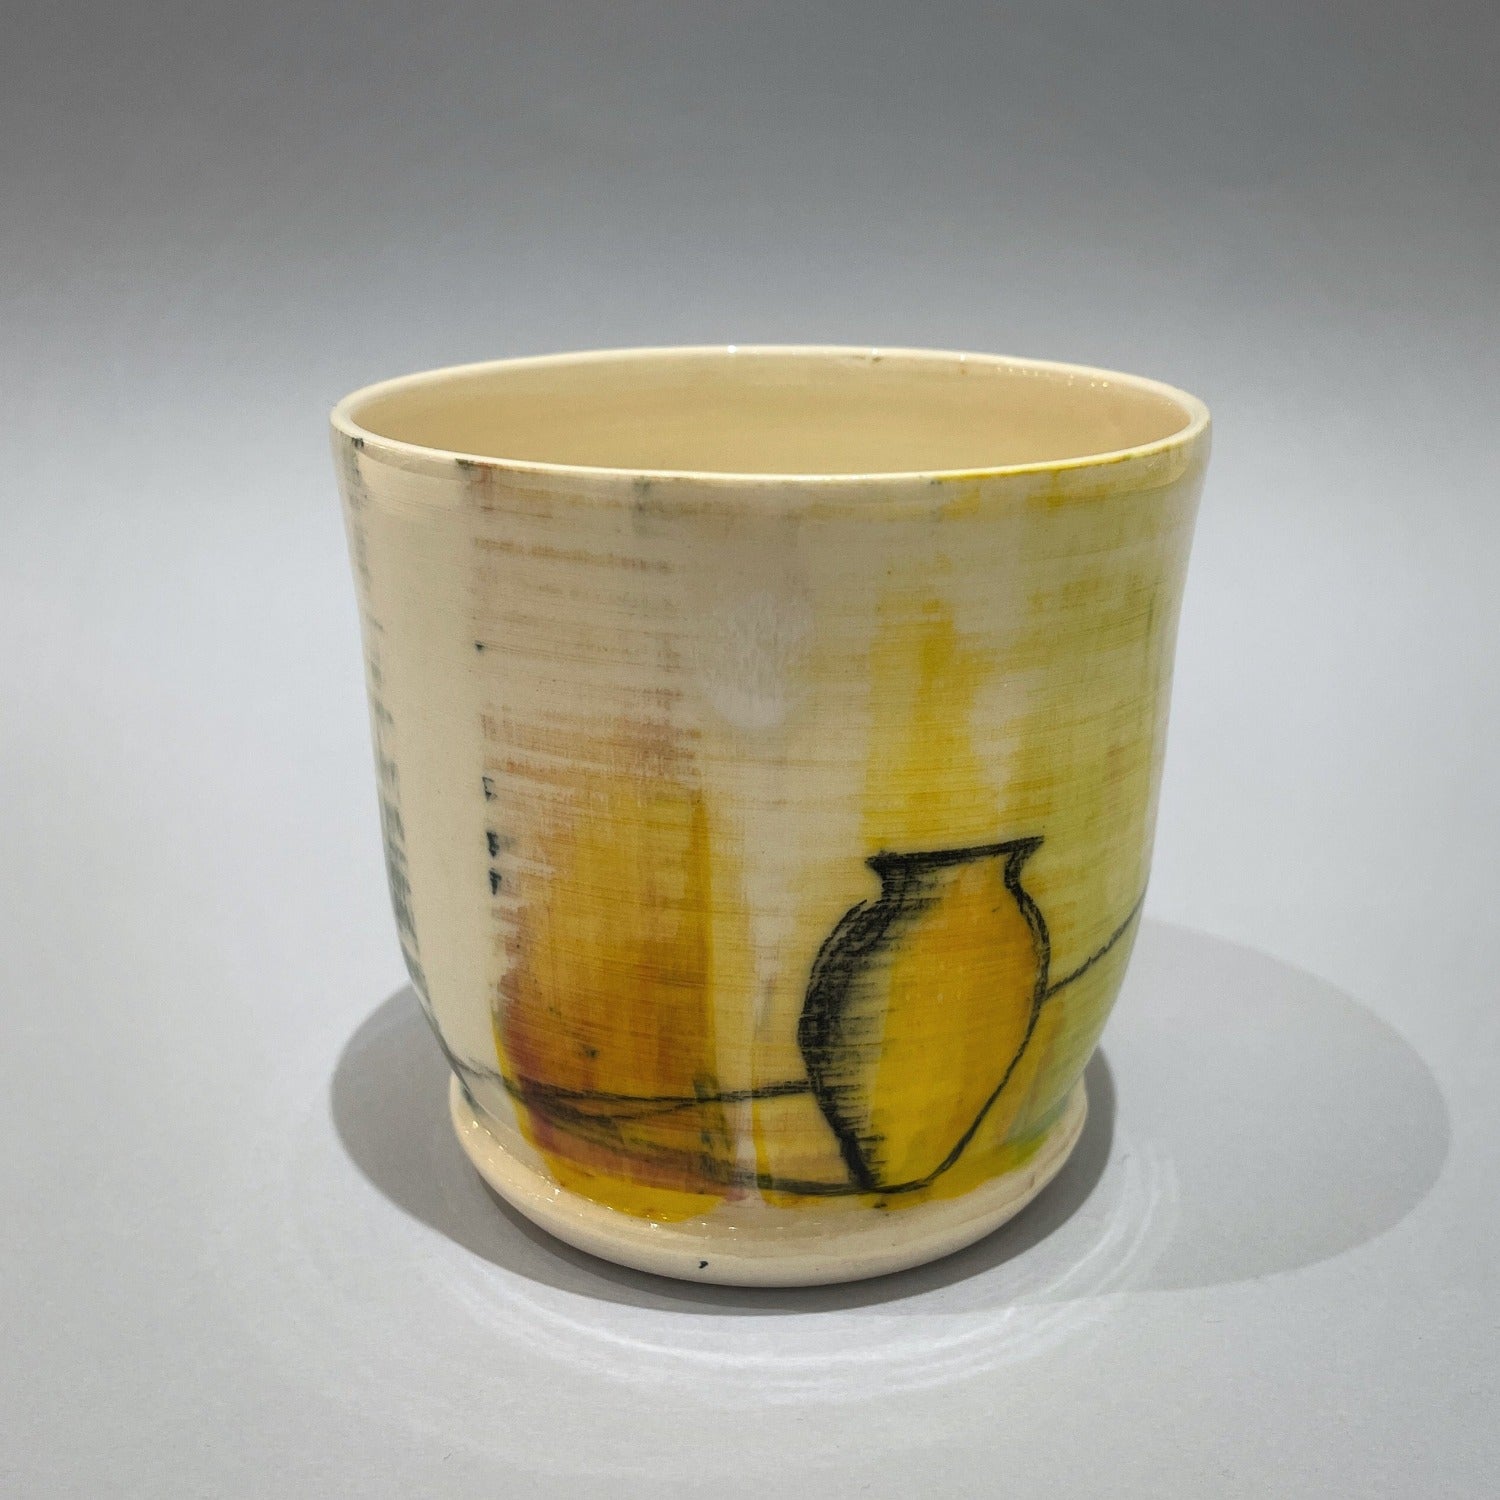 Earthstone Tea Bowl by Laura Manners